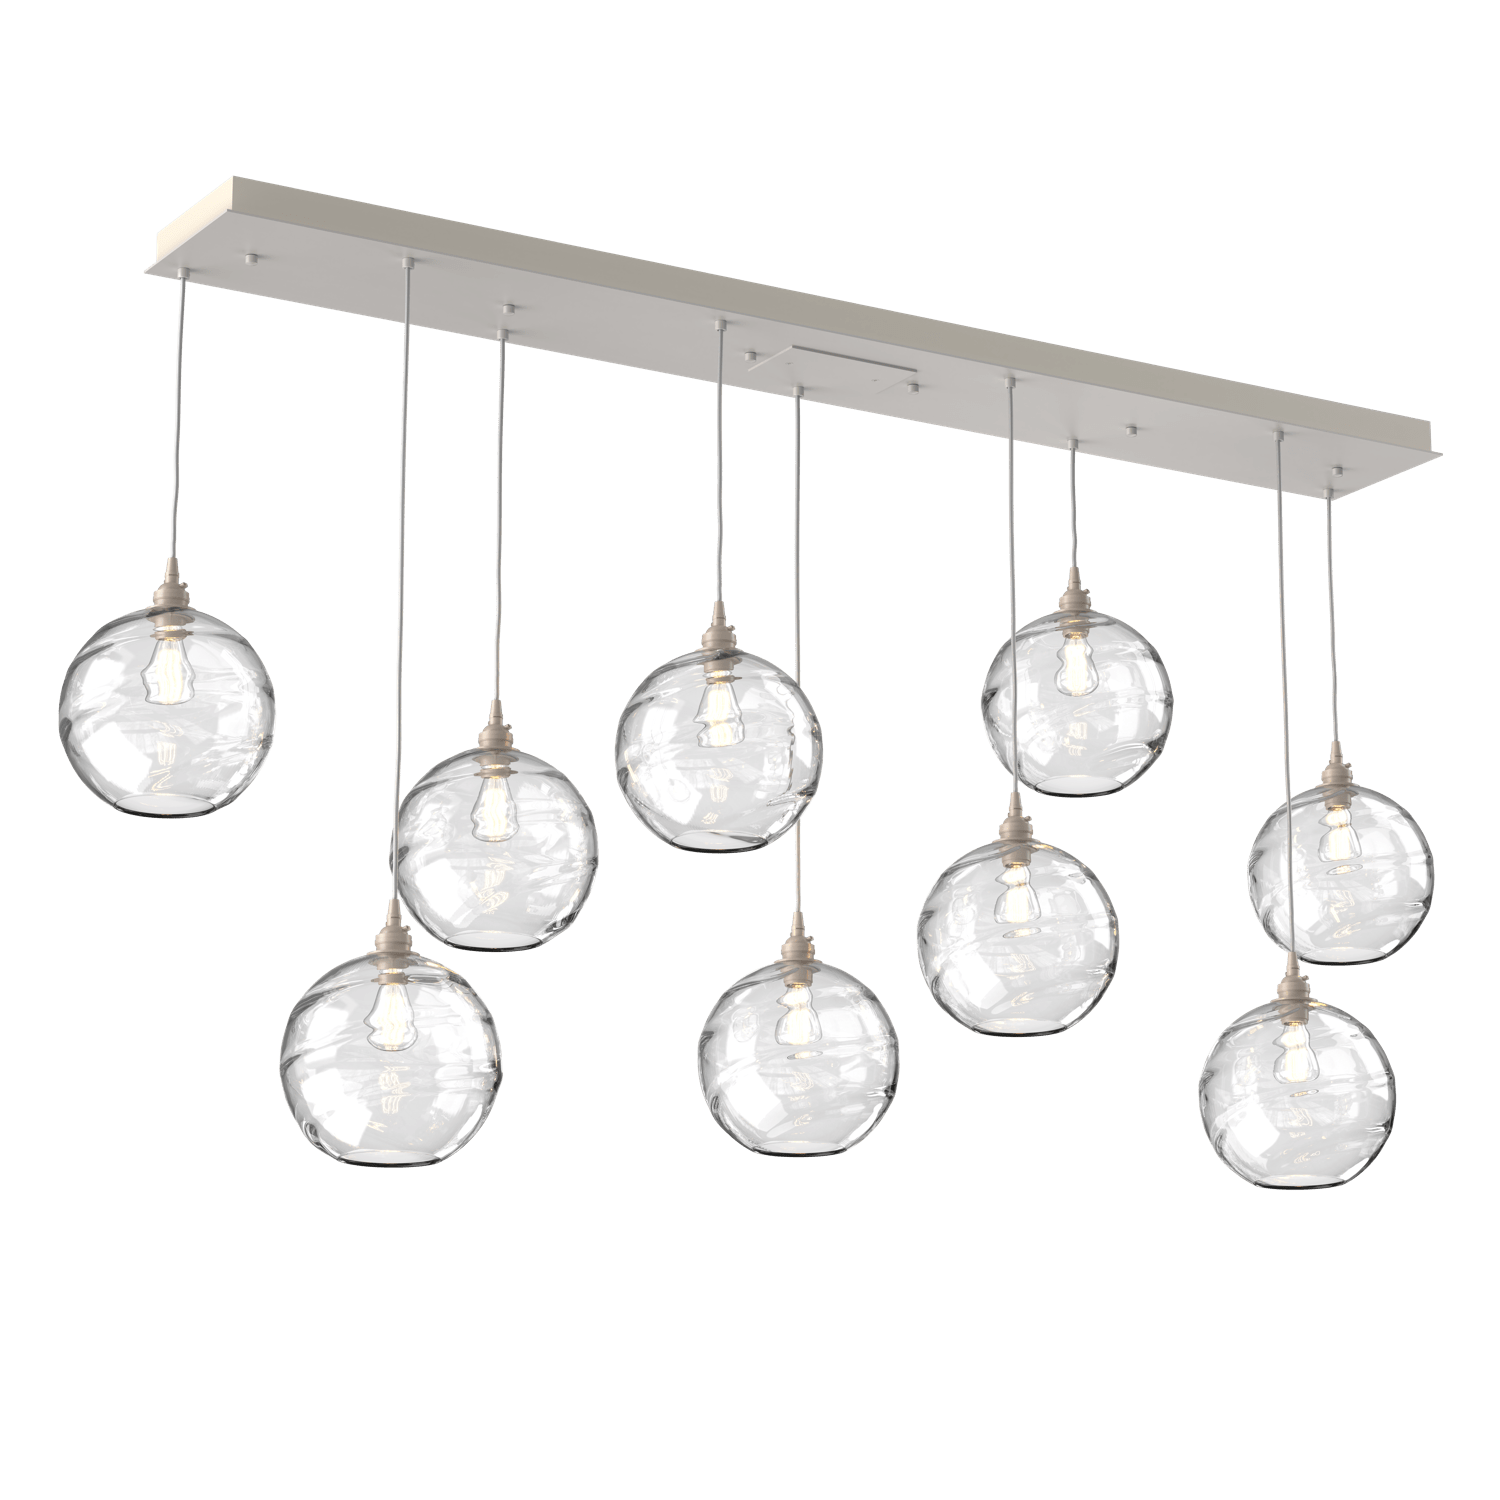 PLB0047-09-BS-OC-Hammerton-Studio-Optic-Blown-Glass-Terra-9-light-linear-pendant-chandelier-with-metallic-beige-silver-finish-and-optic-clear-blown-glass-shades-and-incandescent-lamping